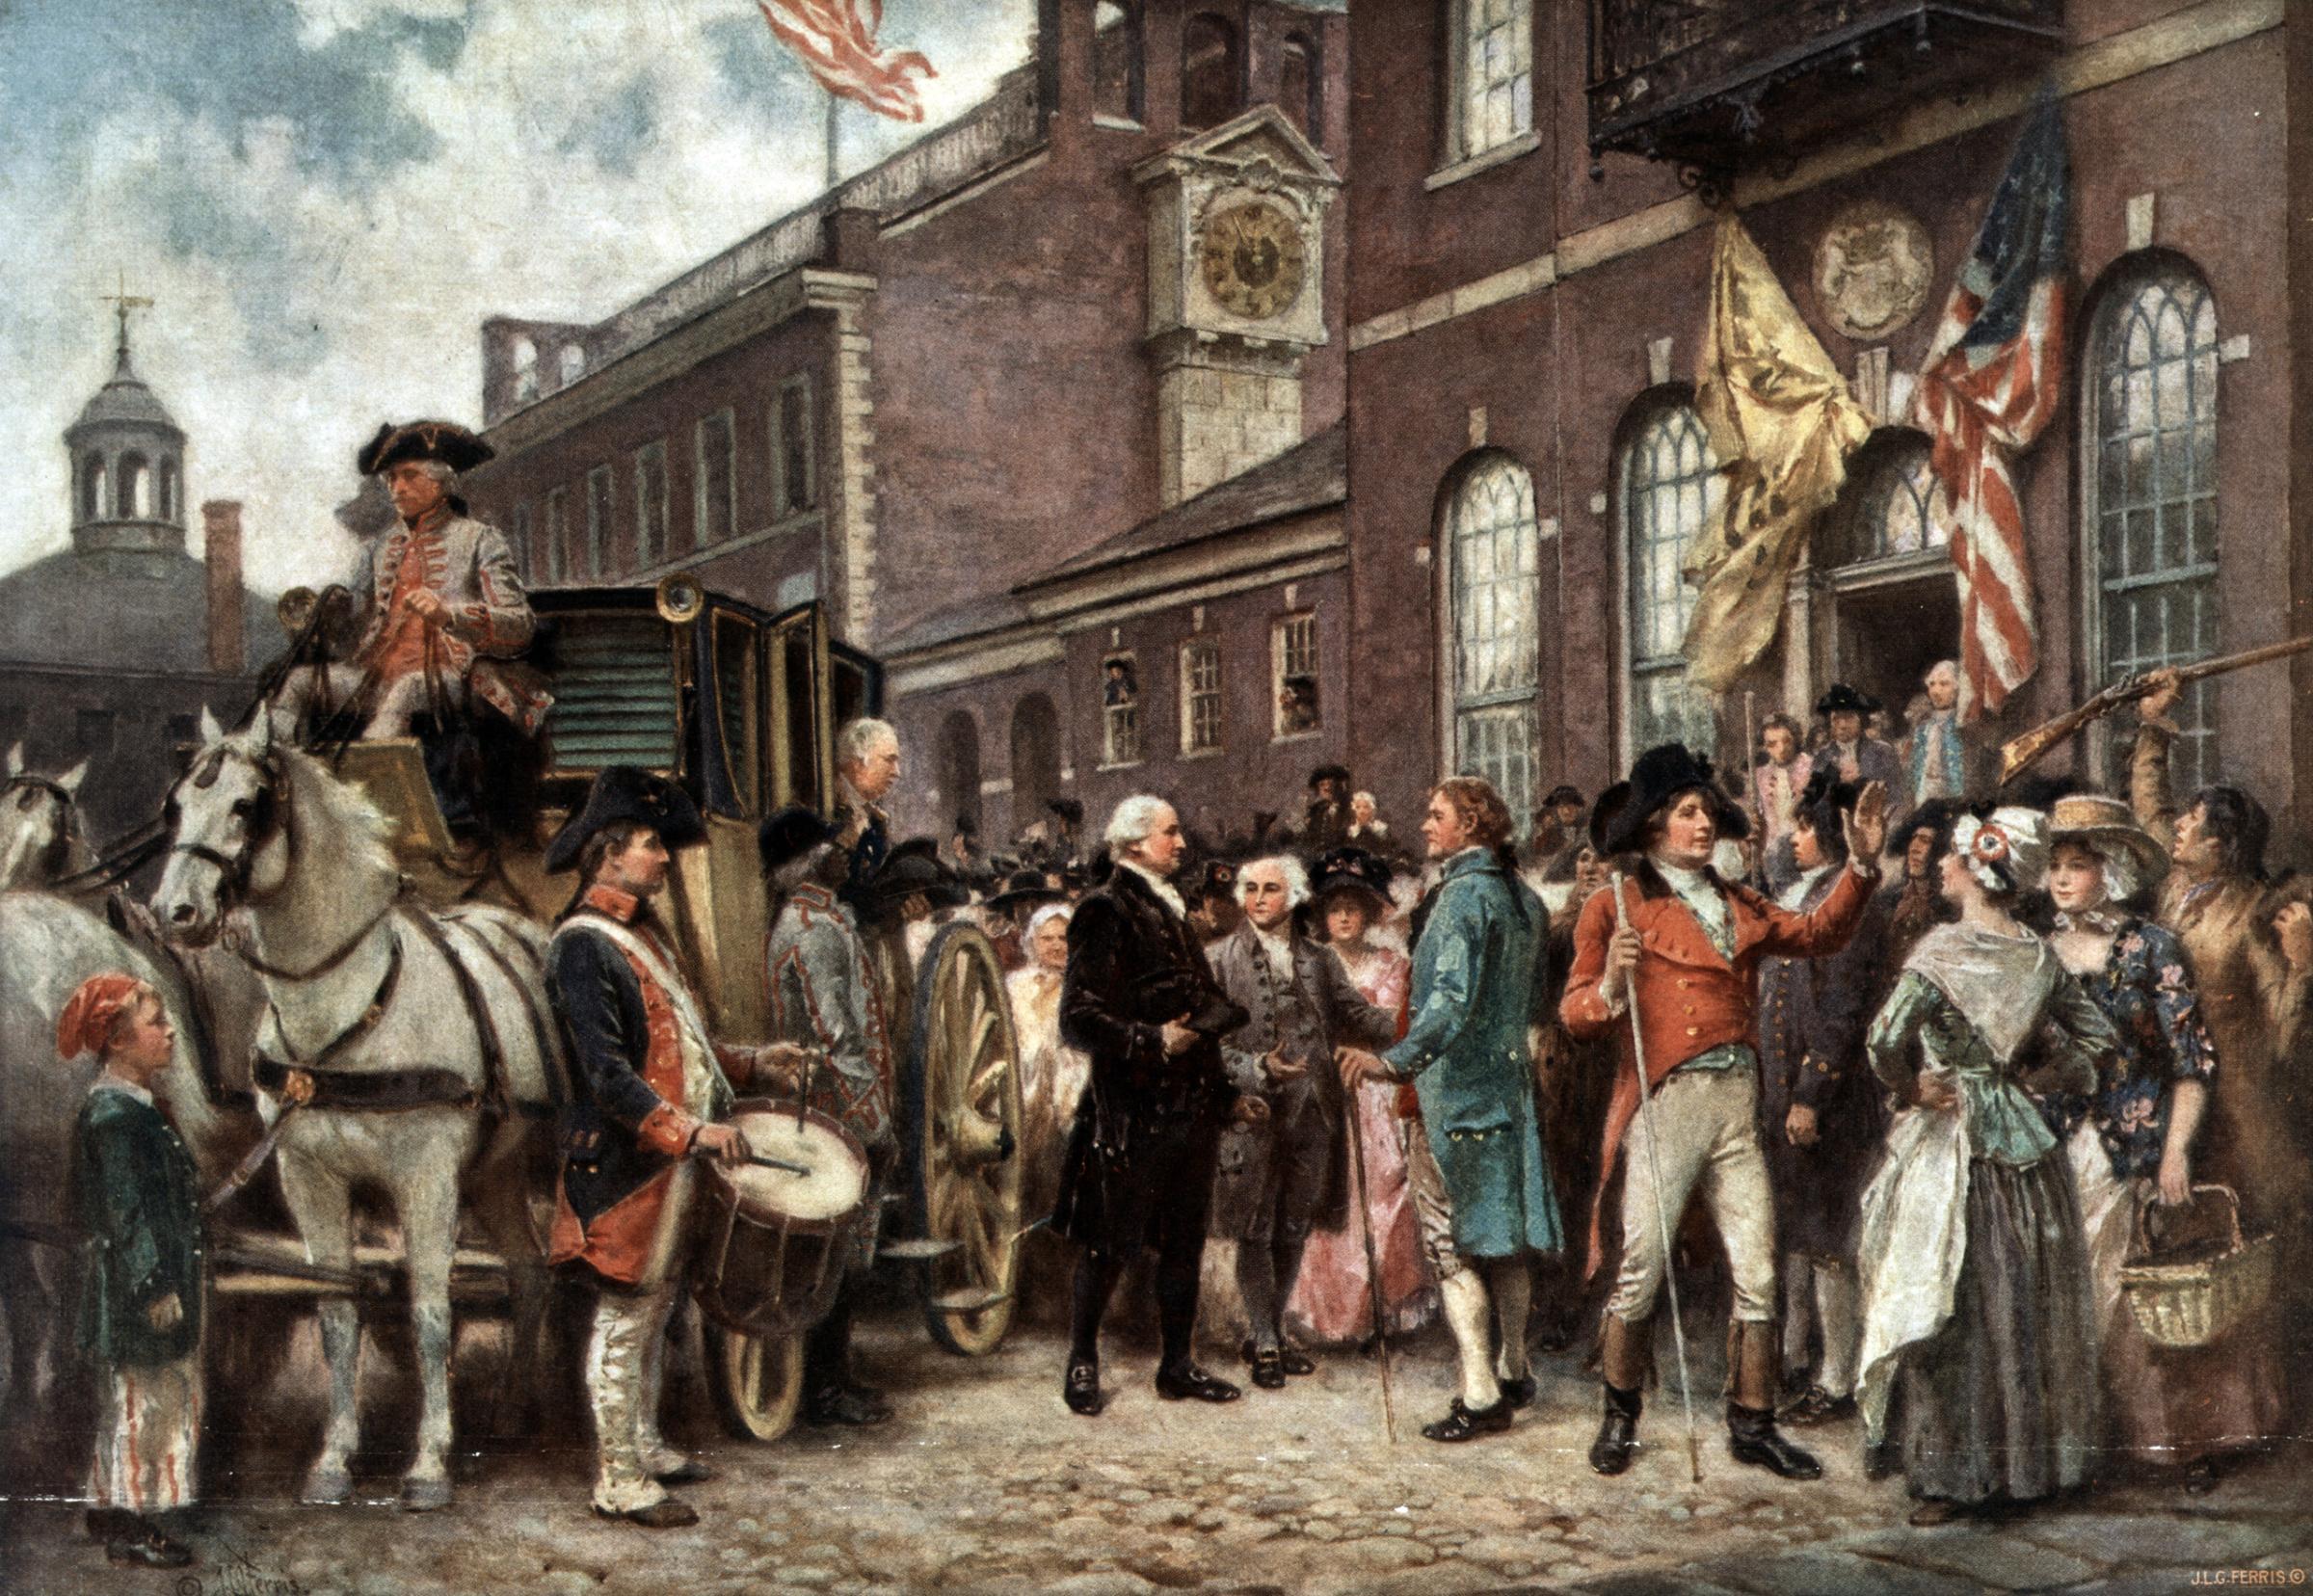 George Washington arriving at Congress Hall in Philadelphia, March 4, 1793 for his second inauguration.